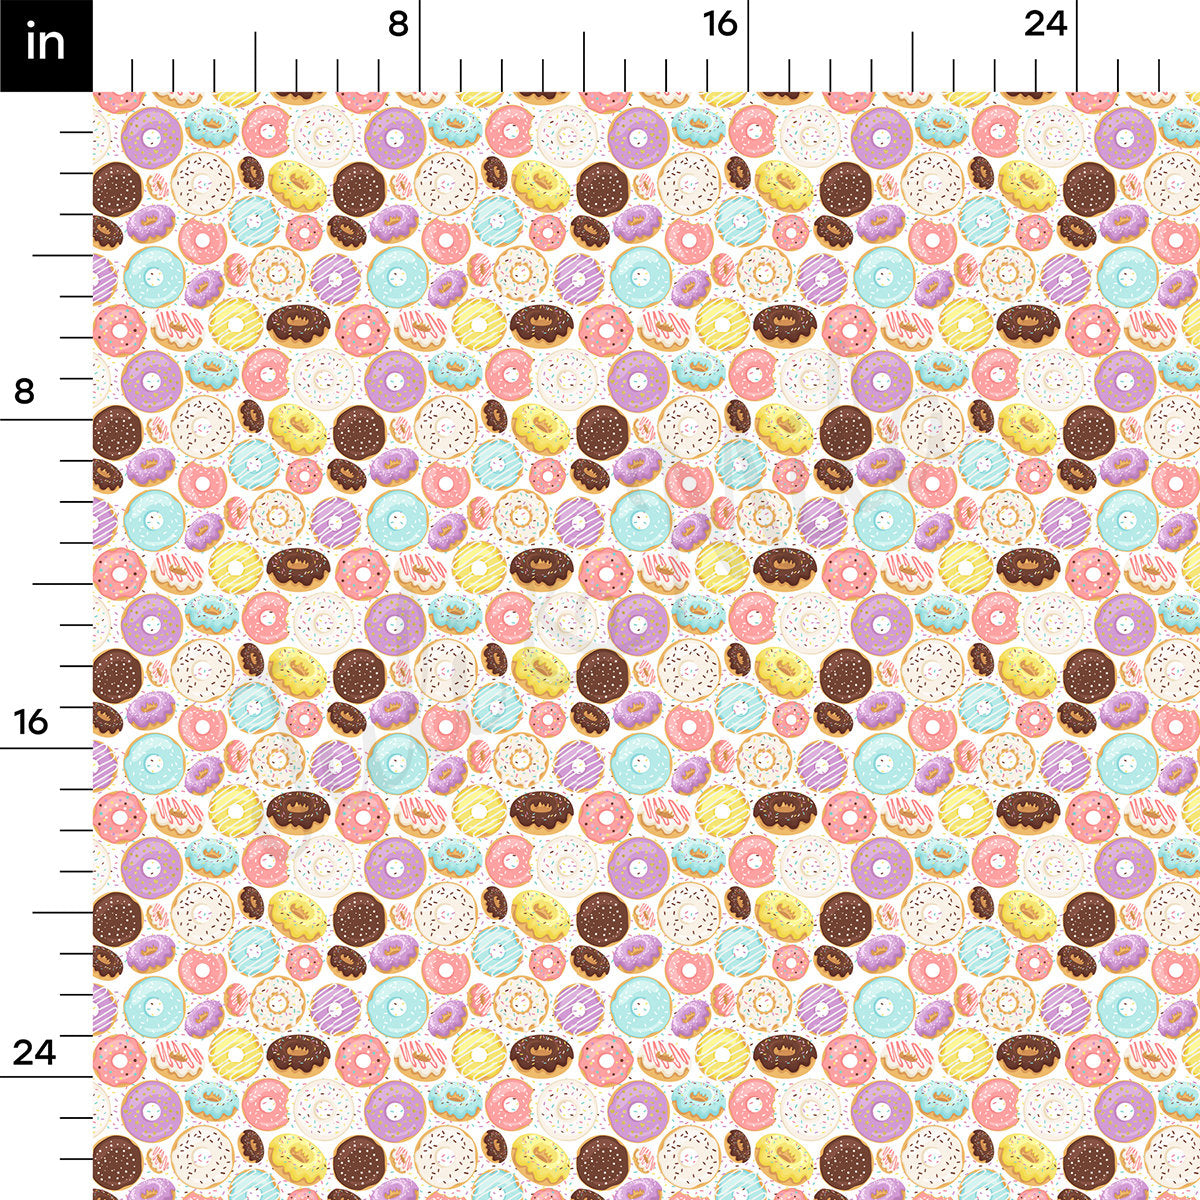 100% Cotton Fabric By the Yard Printed in USA Cotton Sateen -  Cotton Donuts